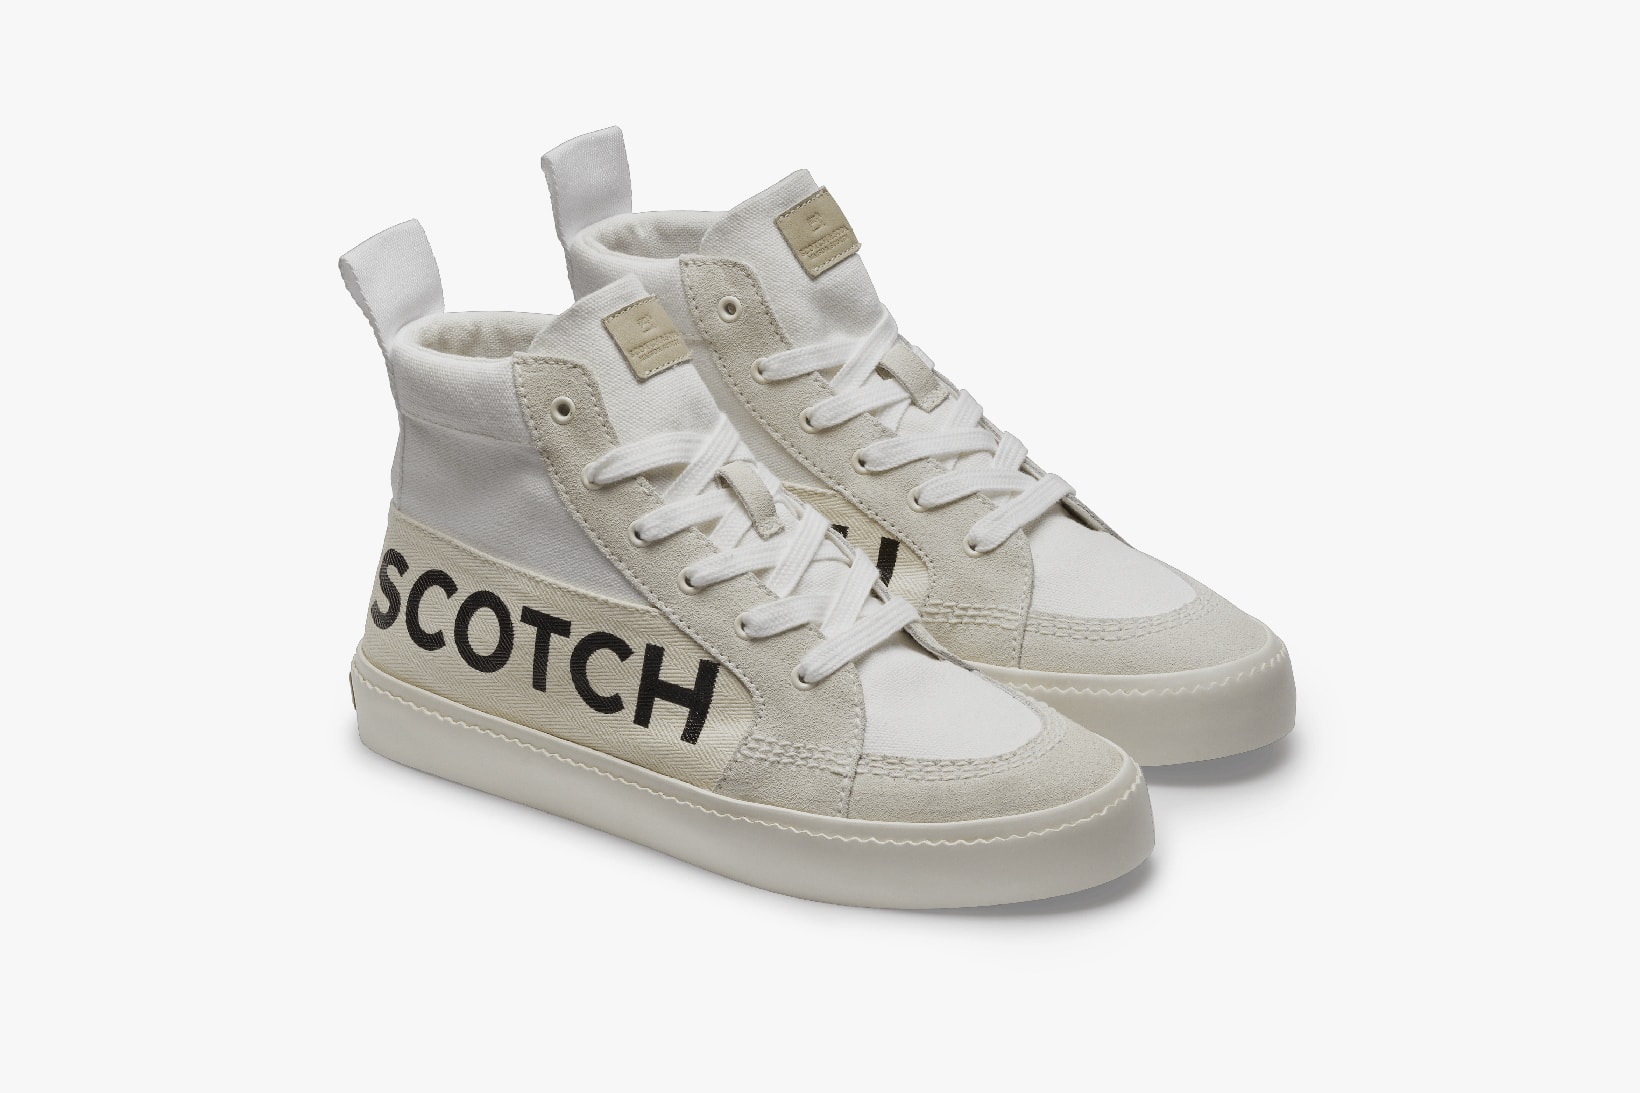 Scotch & Soda SS19 Footwear Collection Skate Shoe Chunky Sneakers Pumps